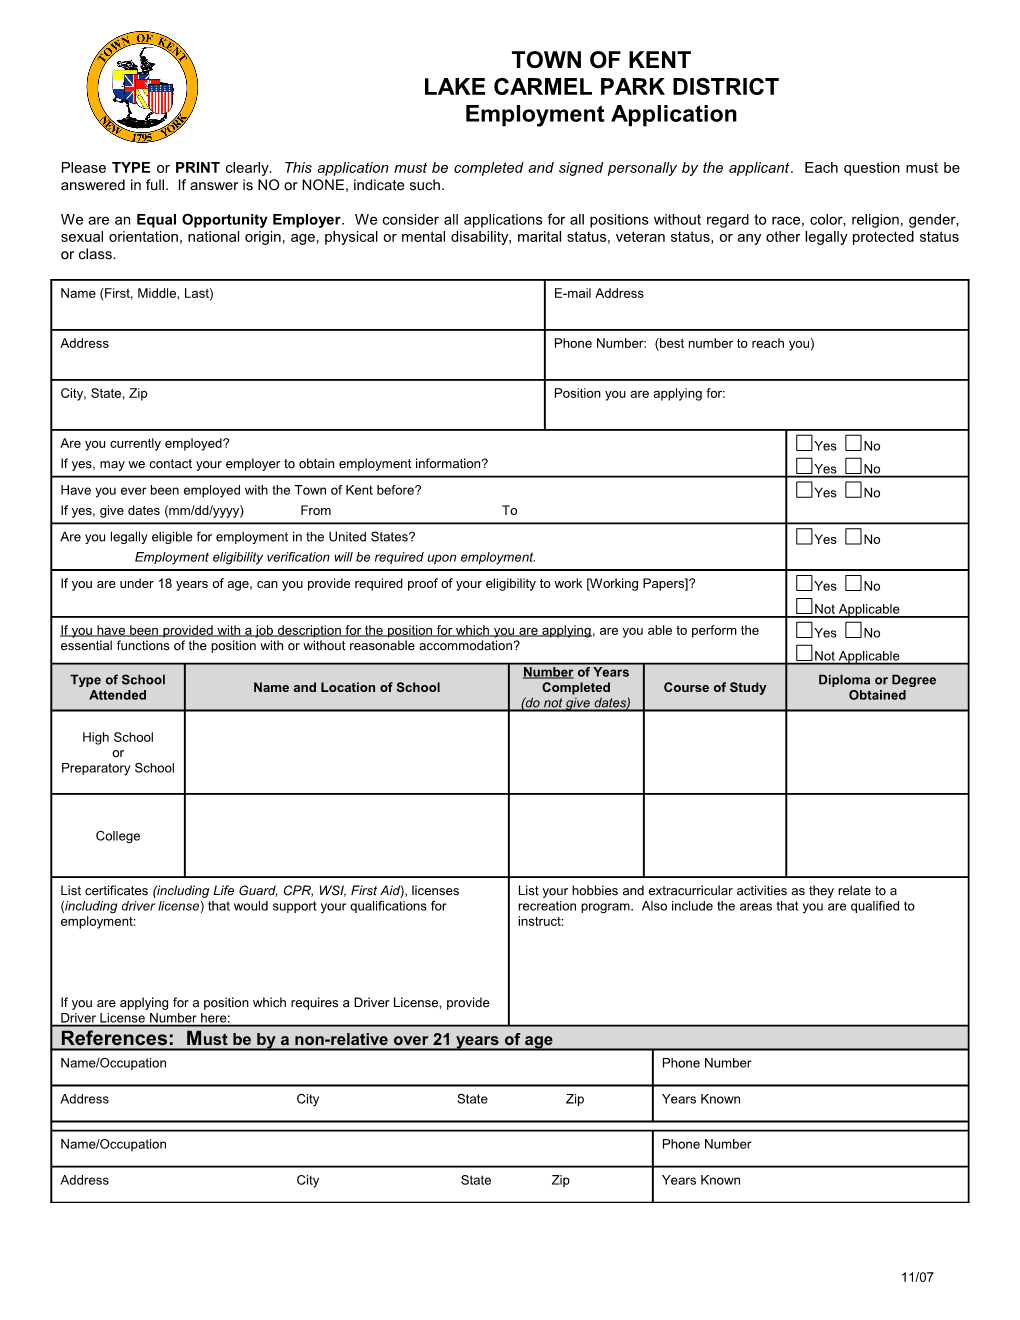 Please TYPE Or PRINT Clearly. This Application Must Be Completed and Signed Personally